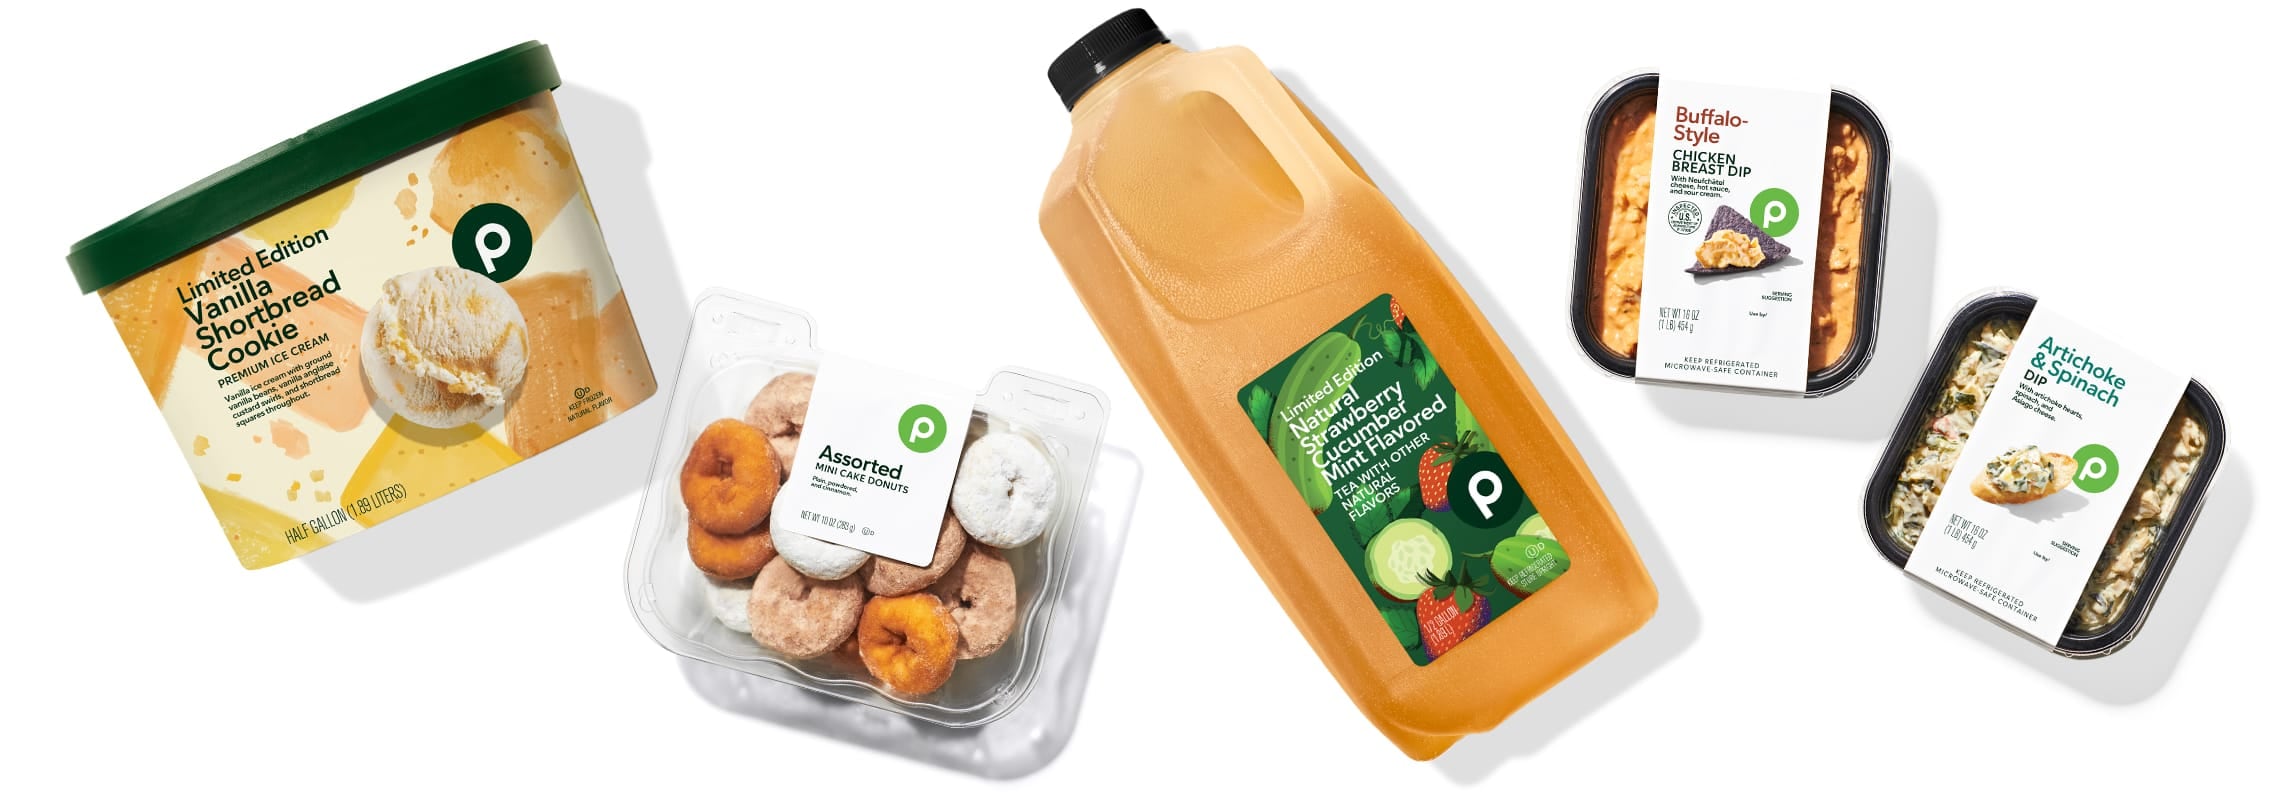 Publix brand ice cream, donuts, lemonade, and dips in new packaging 